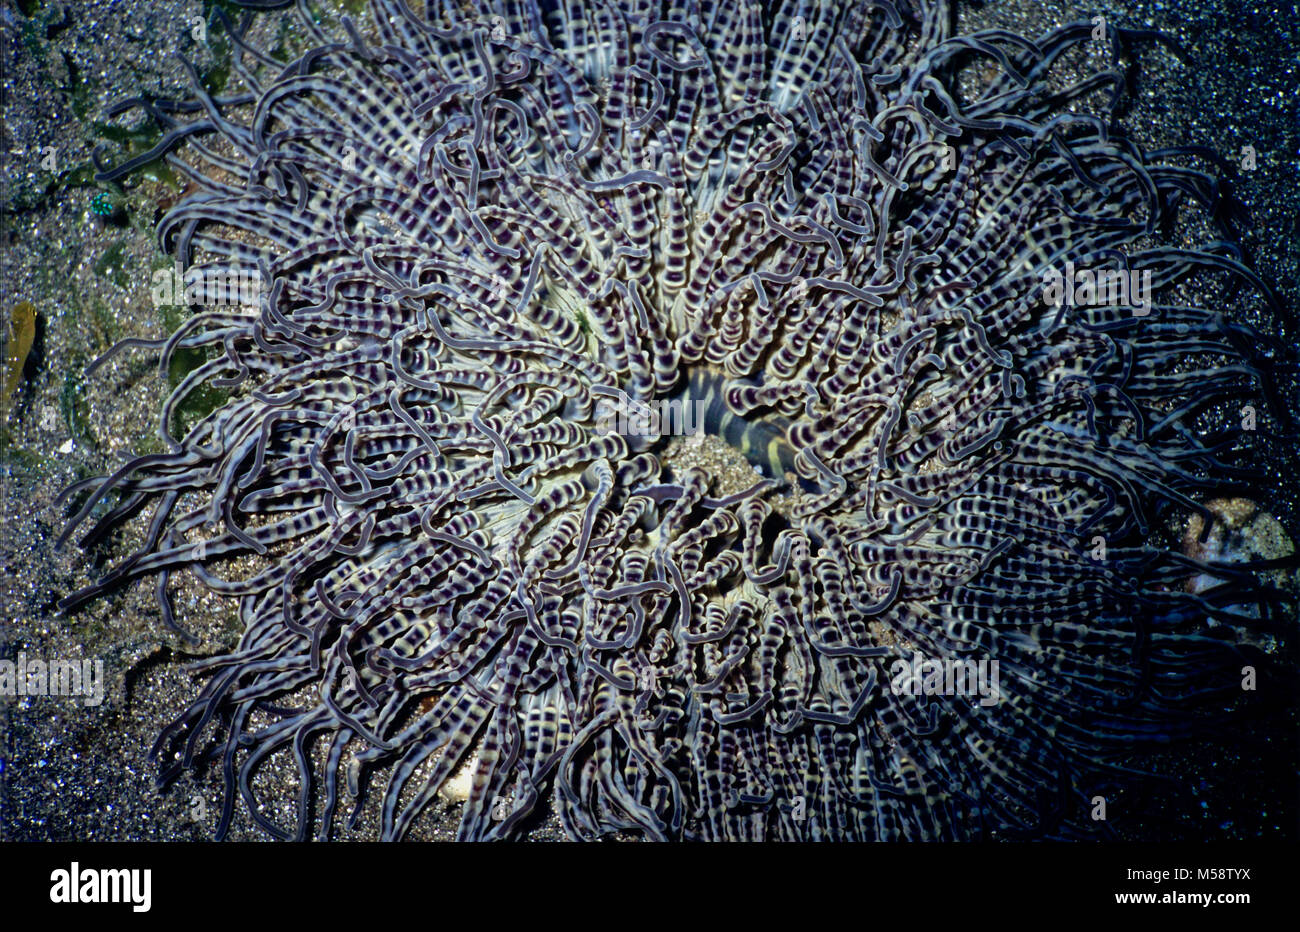 A beaded anemone (Heteractis aurora: diameter 25 cms.). Confined generally to sandy areas, where they feed on small prey. They can be identified readily by the beaded nature of their relatively short tentacles, which usually form a striking pattern, as in this instance. Notable also are the lines on the oral disc, which travel towards the centrally located mouth. The formidable tangle of tentacles catch zooplankton passing in the current, which they hold using their sharp and toxic nematocysts, before transferring the food to the animal's mouth. Photographed near Tulamben, Bali, Indonesia. Stock Photo